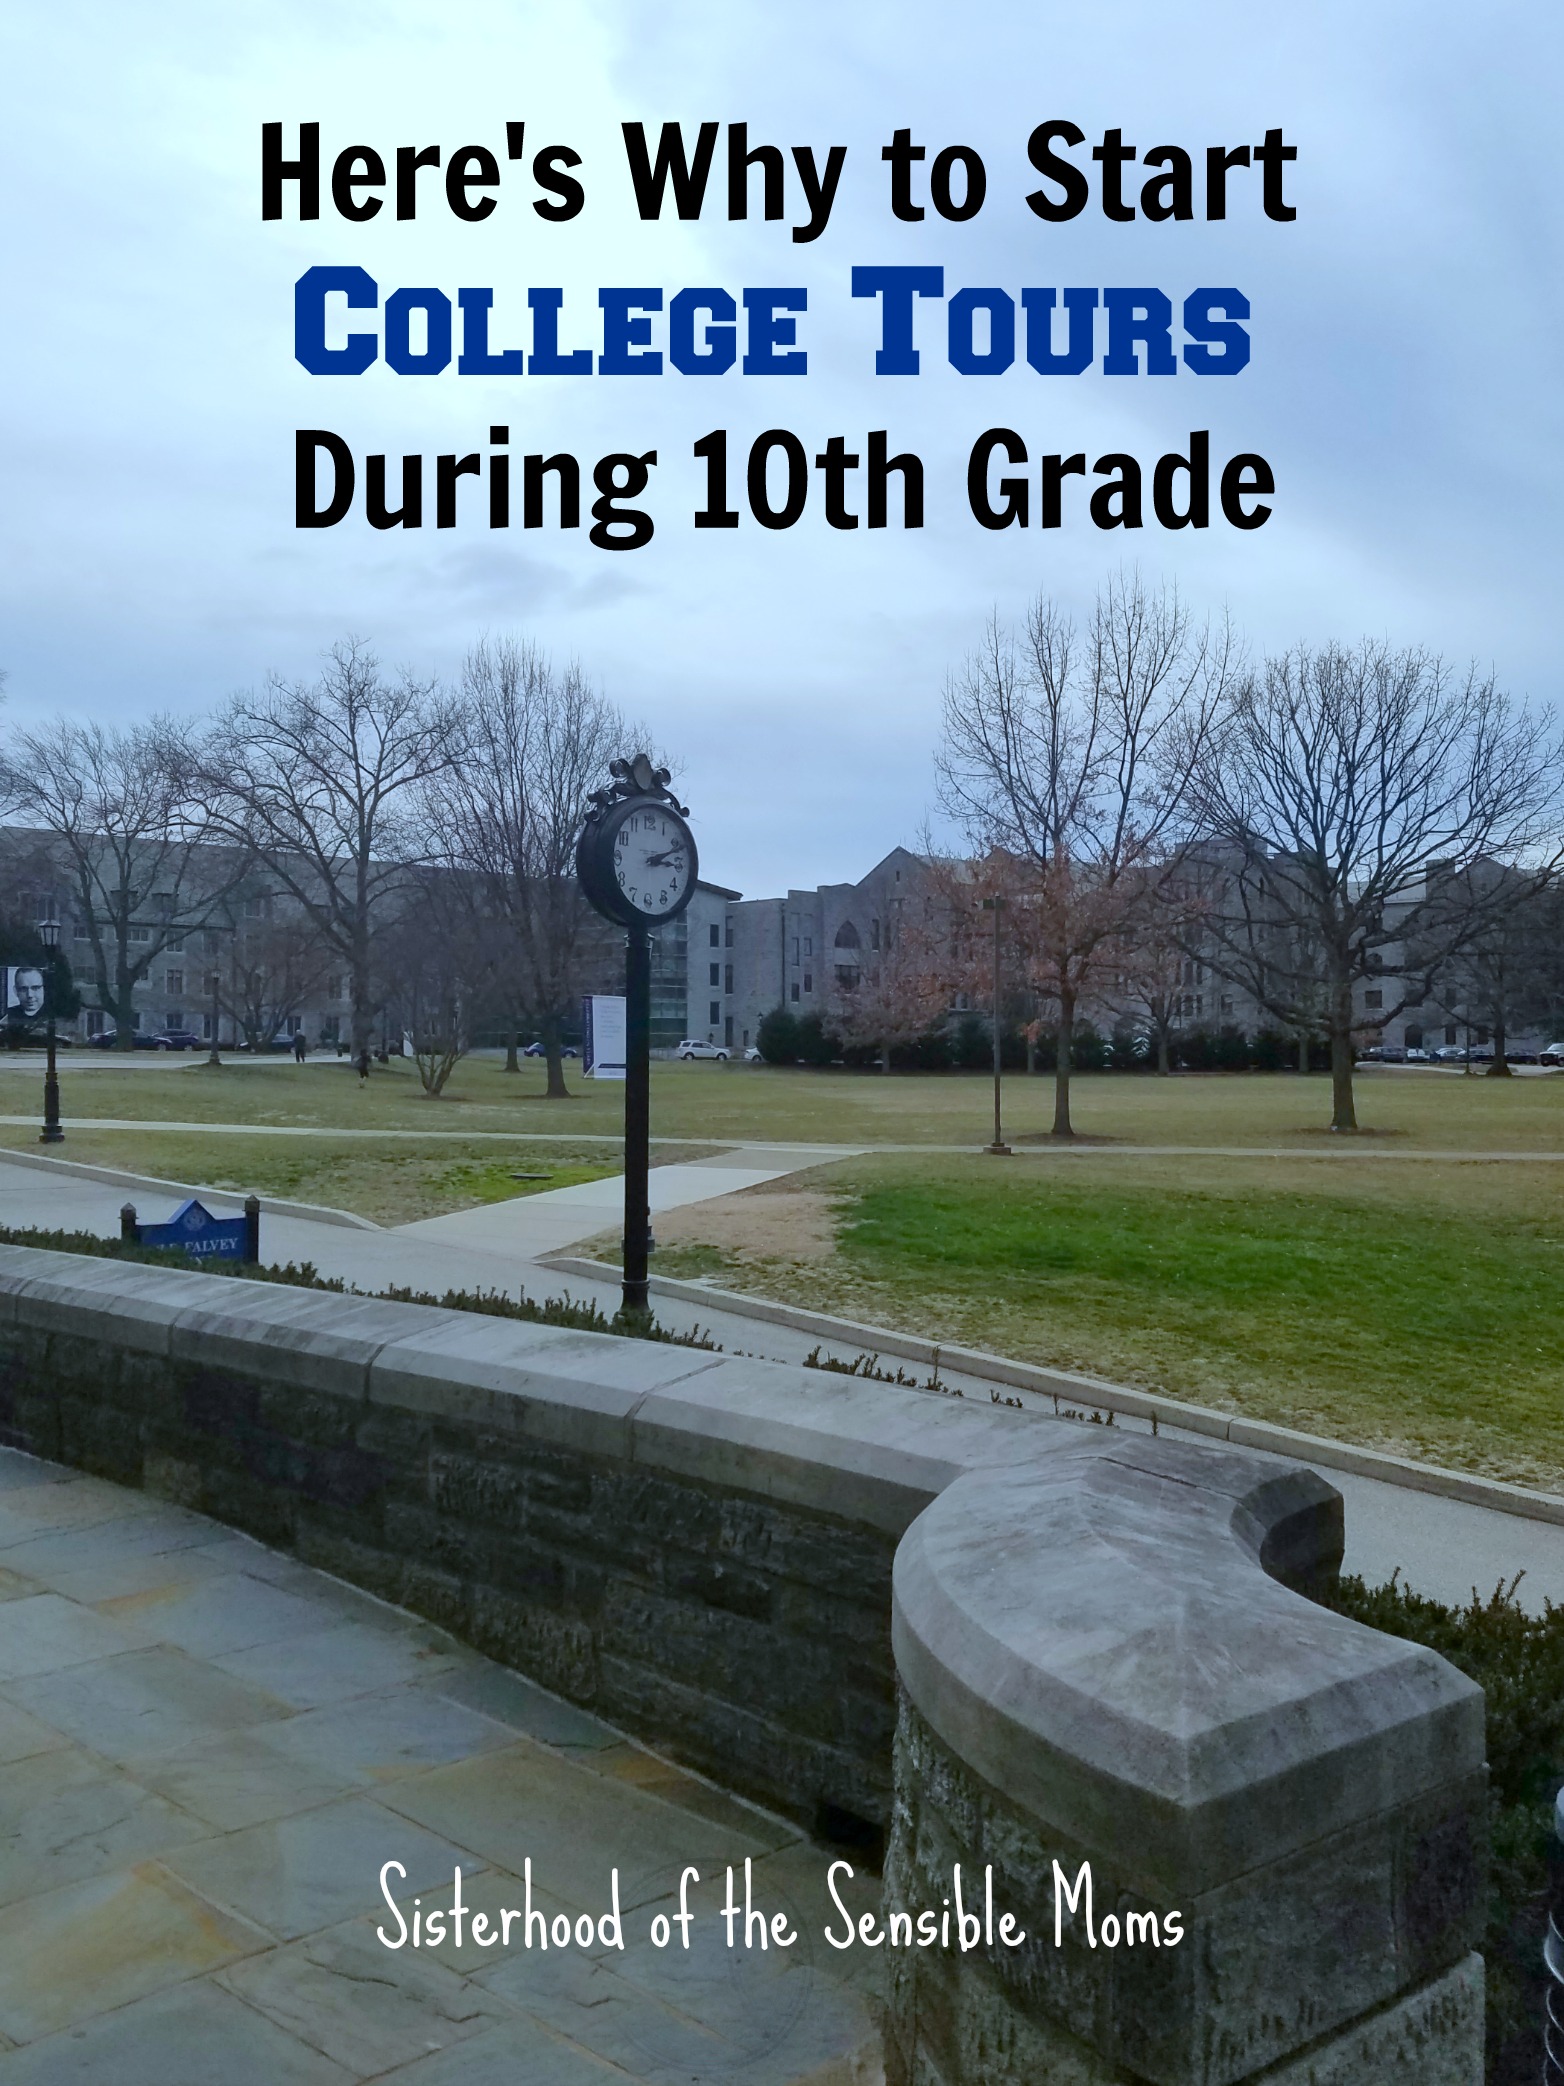 It's all about the calendar! - Here's Why to Start College Tours During 10th Grade | Parenting | Sisterhood of the Sensible Moms